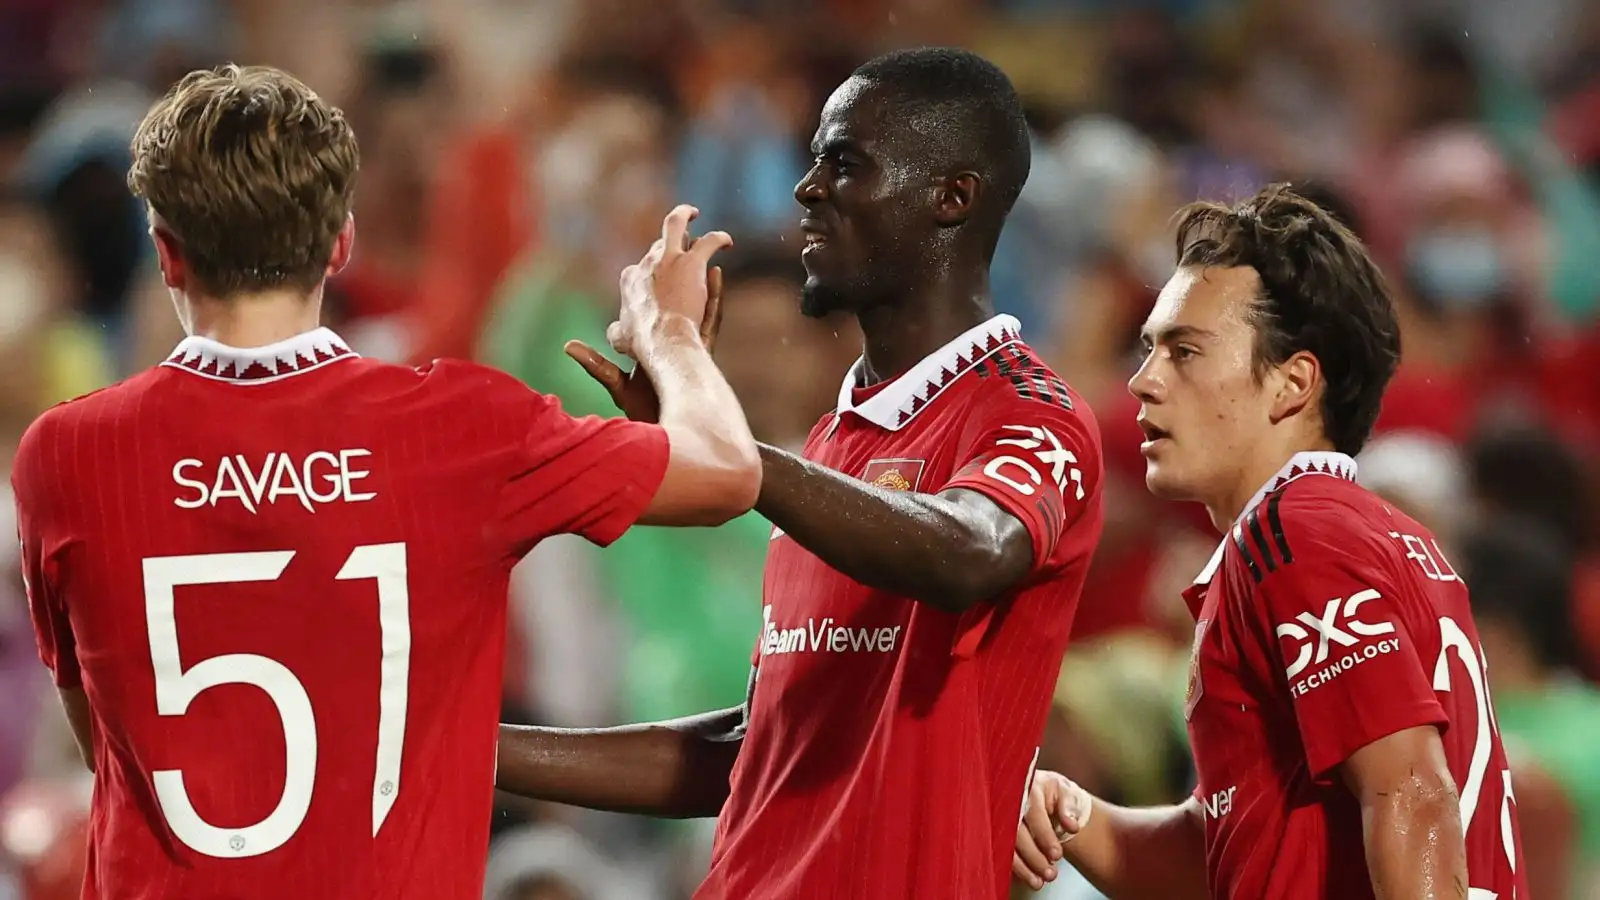 Familiar name has his eye on Eric Bailly as Manchester United transfer talks progress